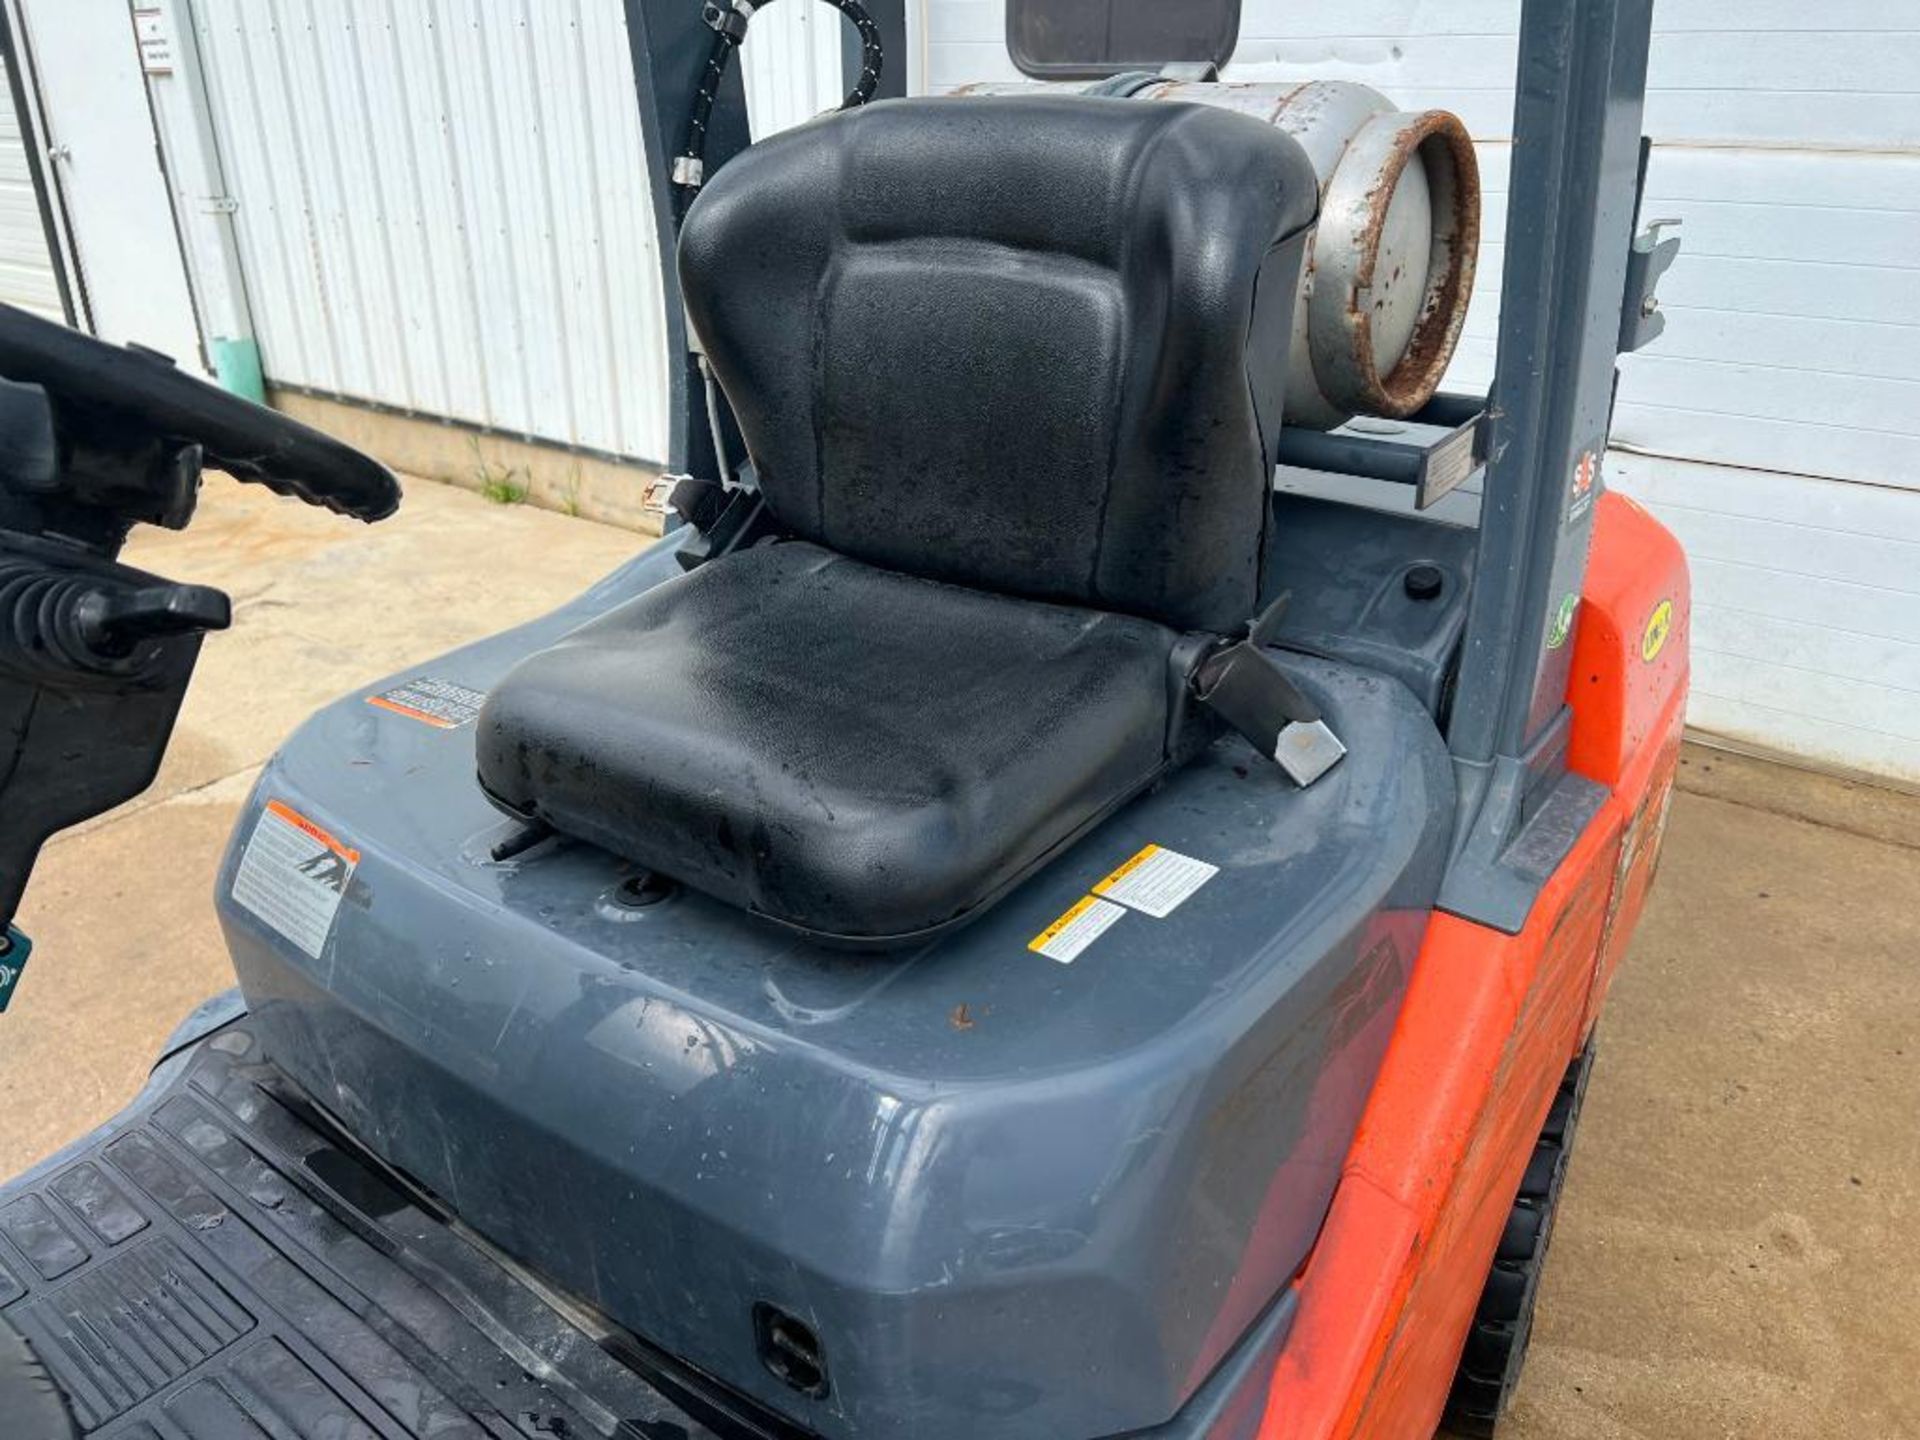 Toyota Forklift Truck, Model 8FGU25, Hours 5,264, LP. Located in Altamont, IL - Image 16 of 19